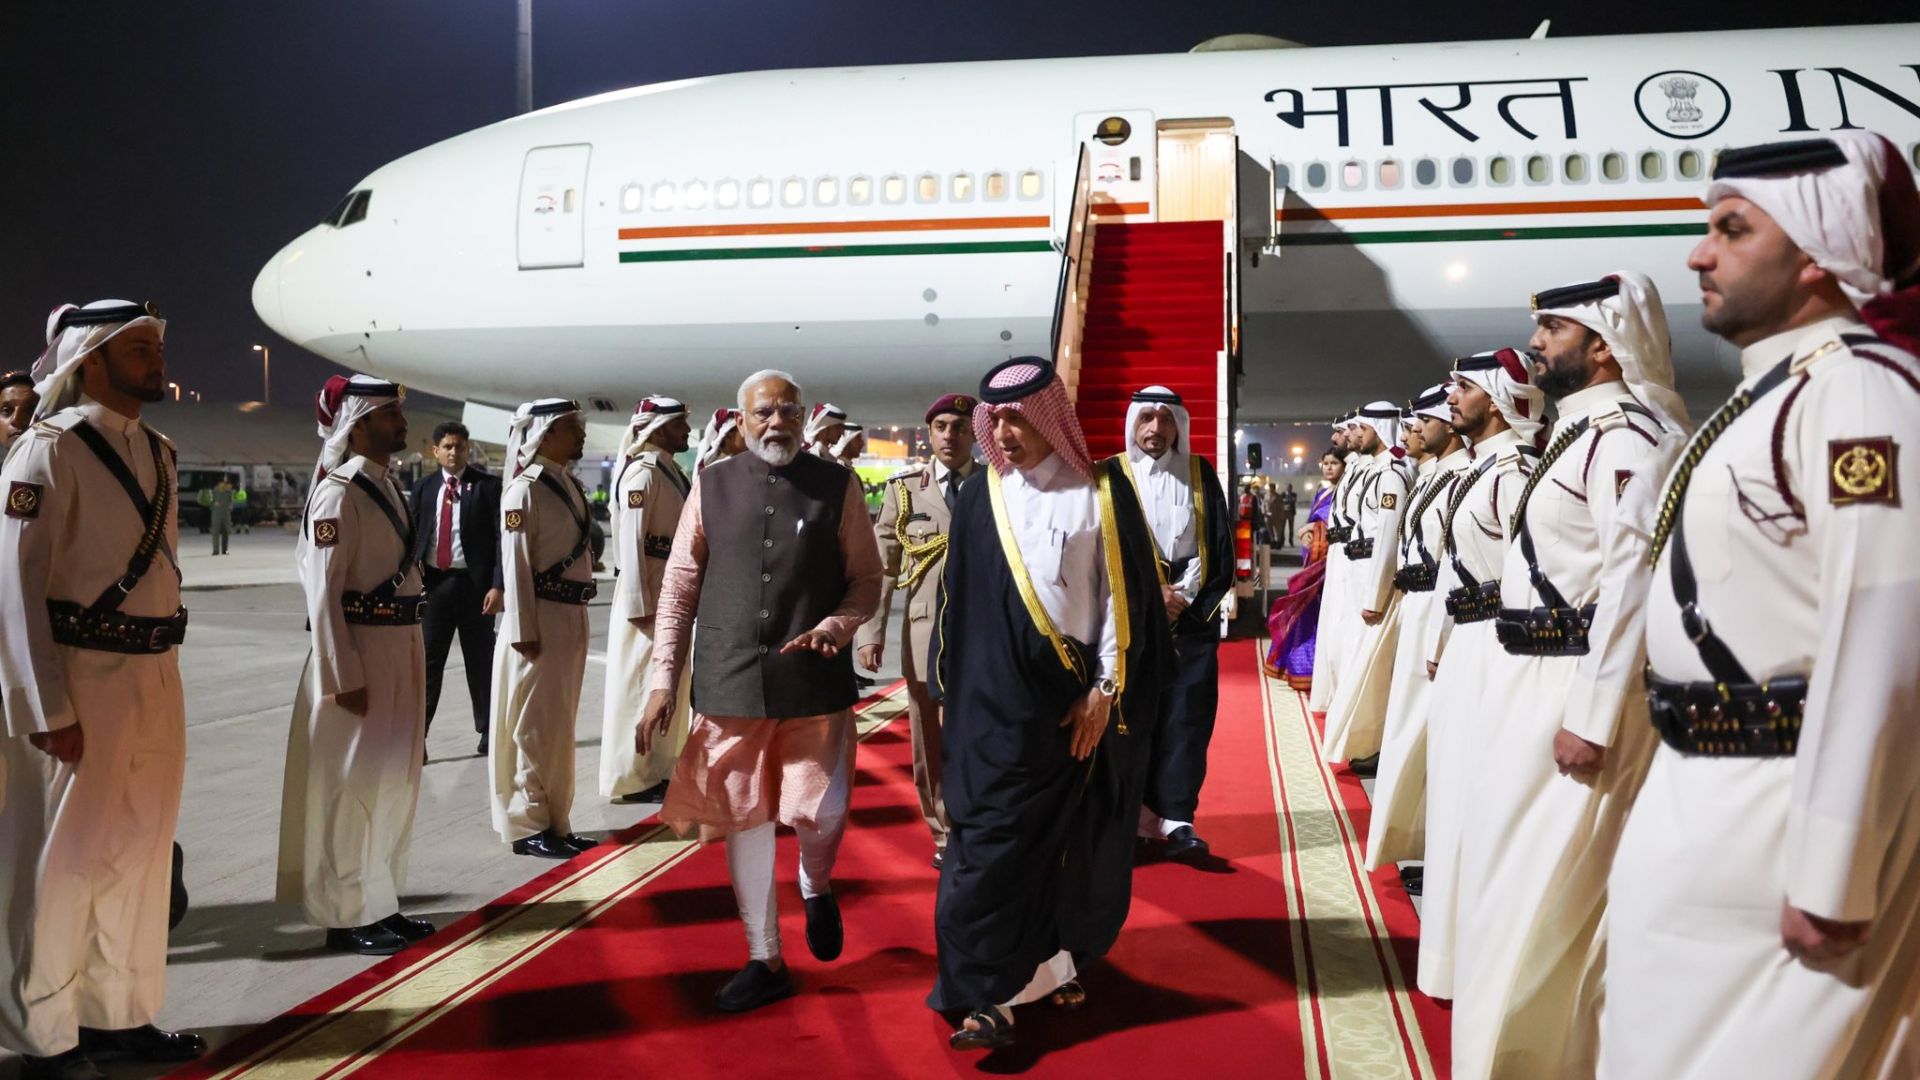 PM Modi Wraps Up His Two Nations Visit, Heads Back To India